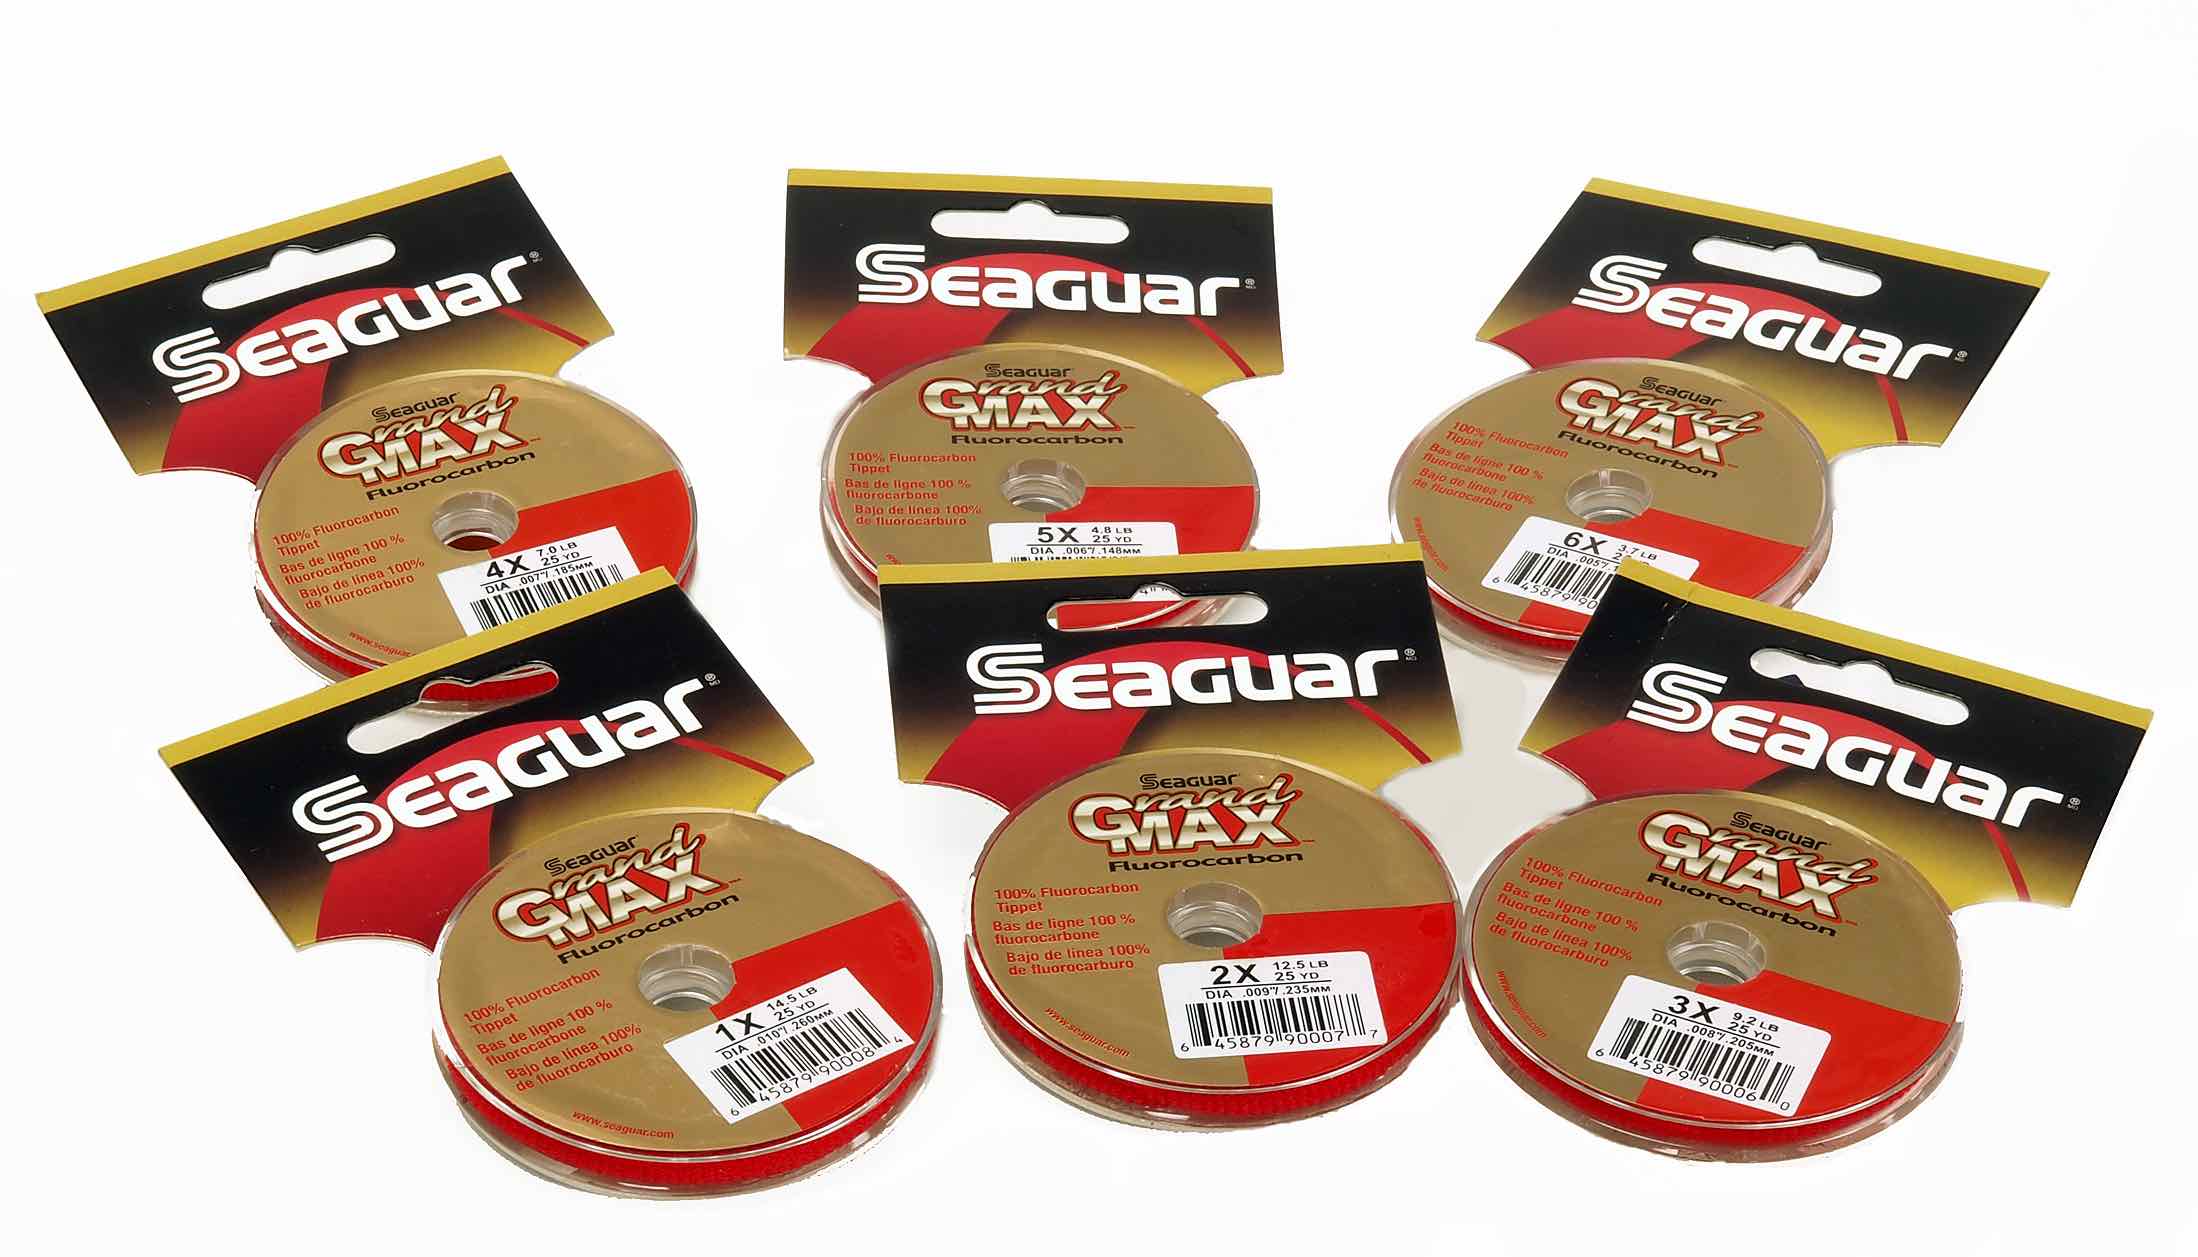 Seaguar Grand Max Tippet Material – 100% Fluorocarbon – The First